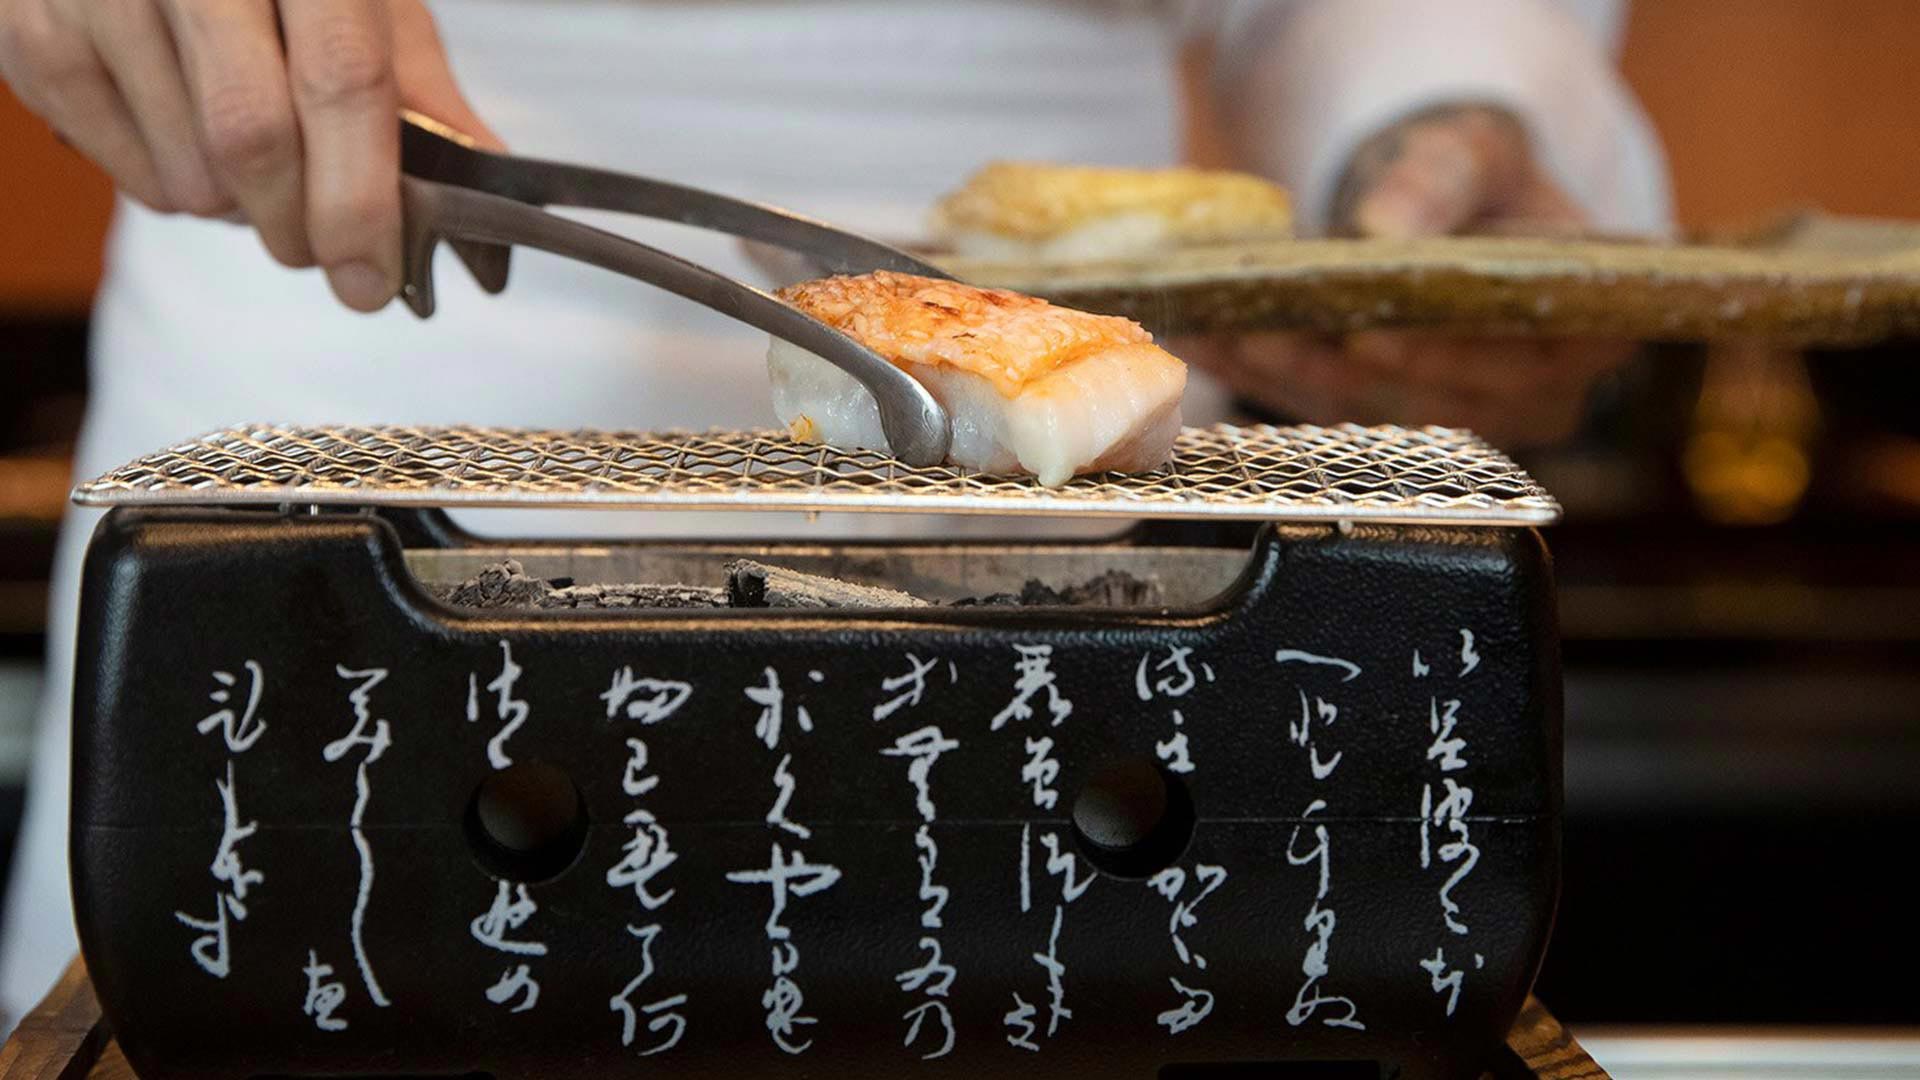 Chef gilling fish over charcoal at Waku Ghin, a restaurant to hold private dining events